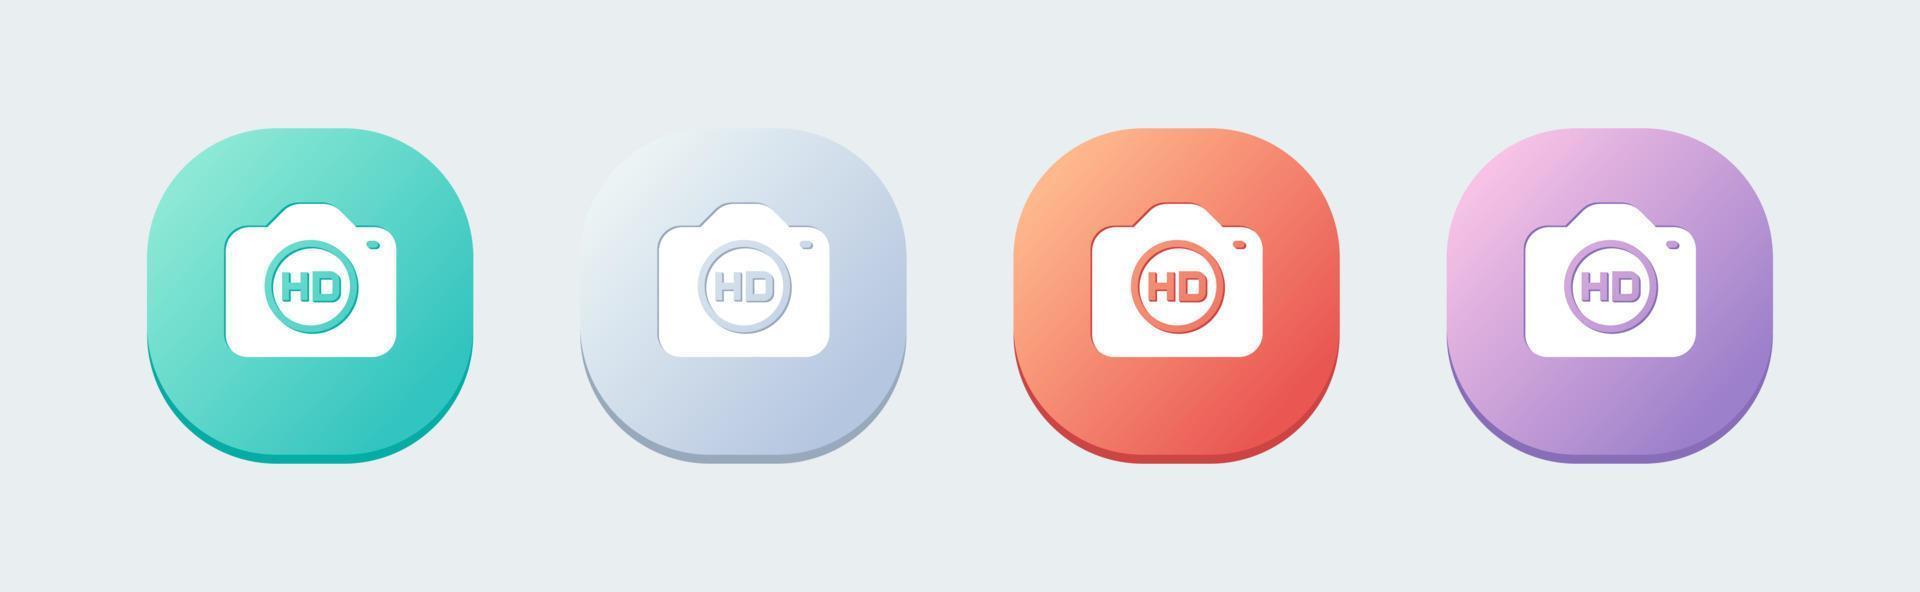 Hd resolution solid icon in flat design style. High definition signs vector illustration.